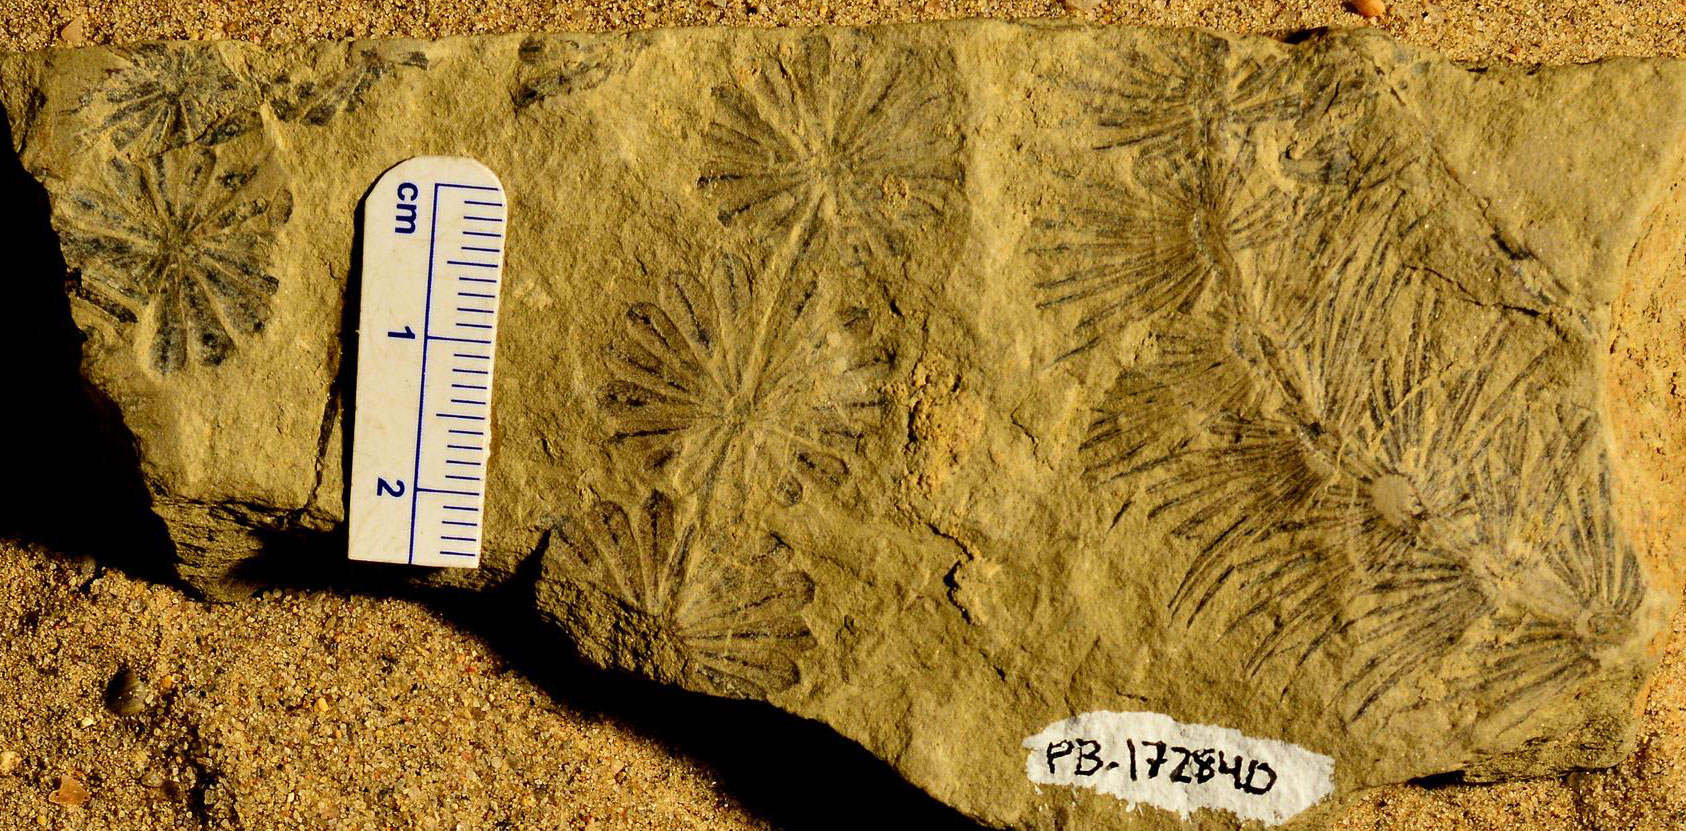 Photograph of foliage leaves of an ancient sphenophyte tree from the Pennsylvanian of Ohio. The photo shows compressions of three slender branches preserved on a piece of light brown rock. Two branches have whorls of leaves with an elongated obovate shape. One branch shows whorls of leaves that are needle-like in appearance. In all cases, the leaf whorls are widely and regularly spaced.